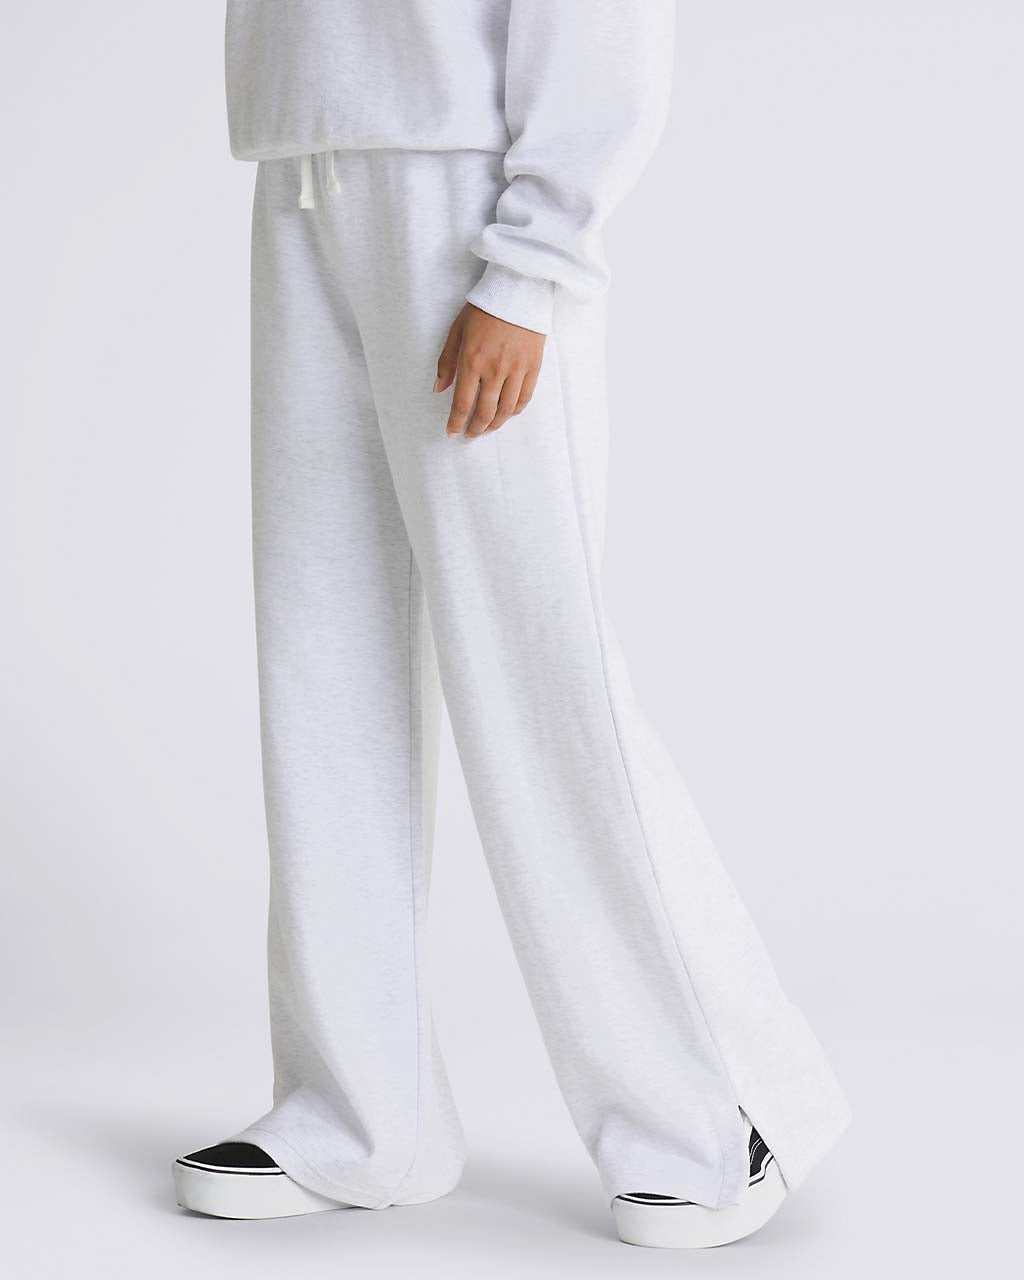 Elevated Double Knit Sweatpants - White Heather